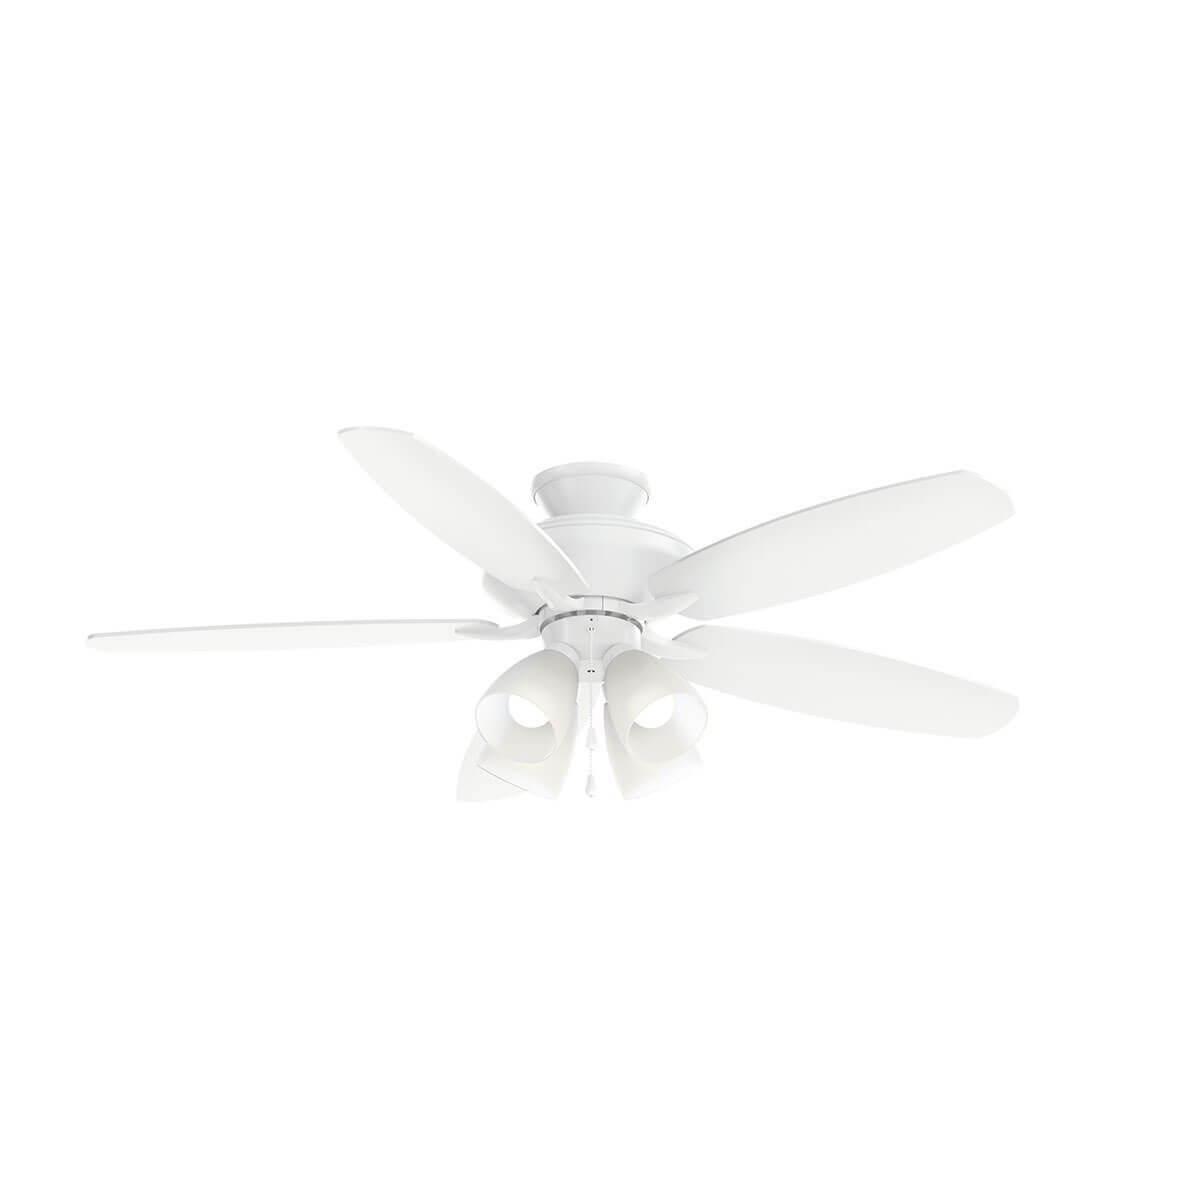 Kichler Renew 52 inch 5 Blade Pull Chain LED Ceiling Fan in Matte White 330162MWH